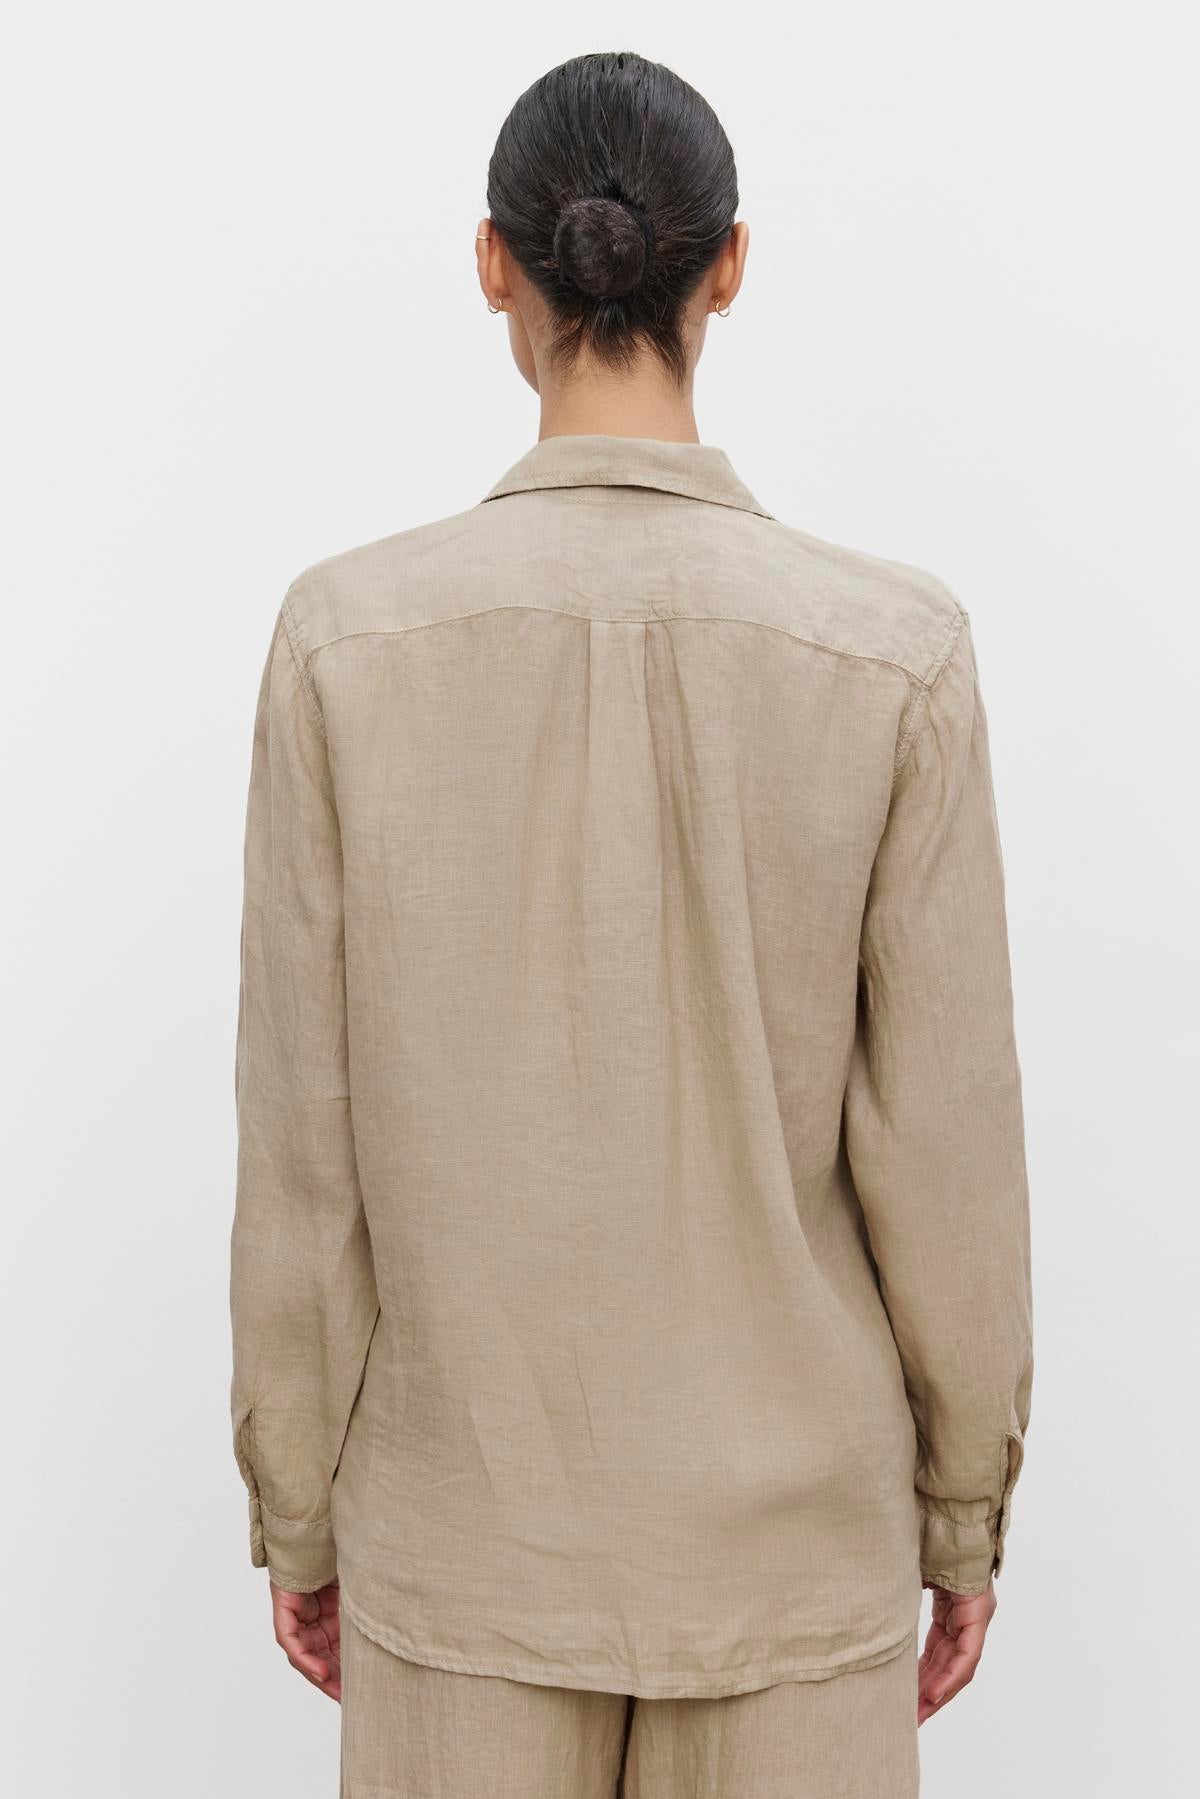   Woman in a Velvet by Jenny Graham Mulholland Shirt with a scooped hemline, viewed from the back. 